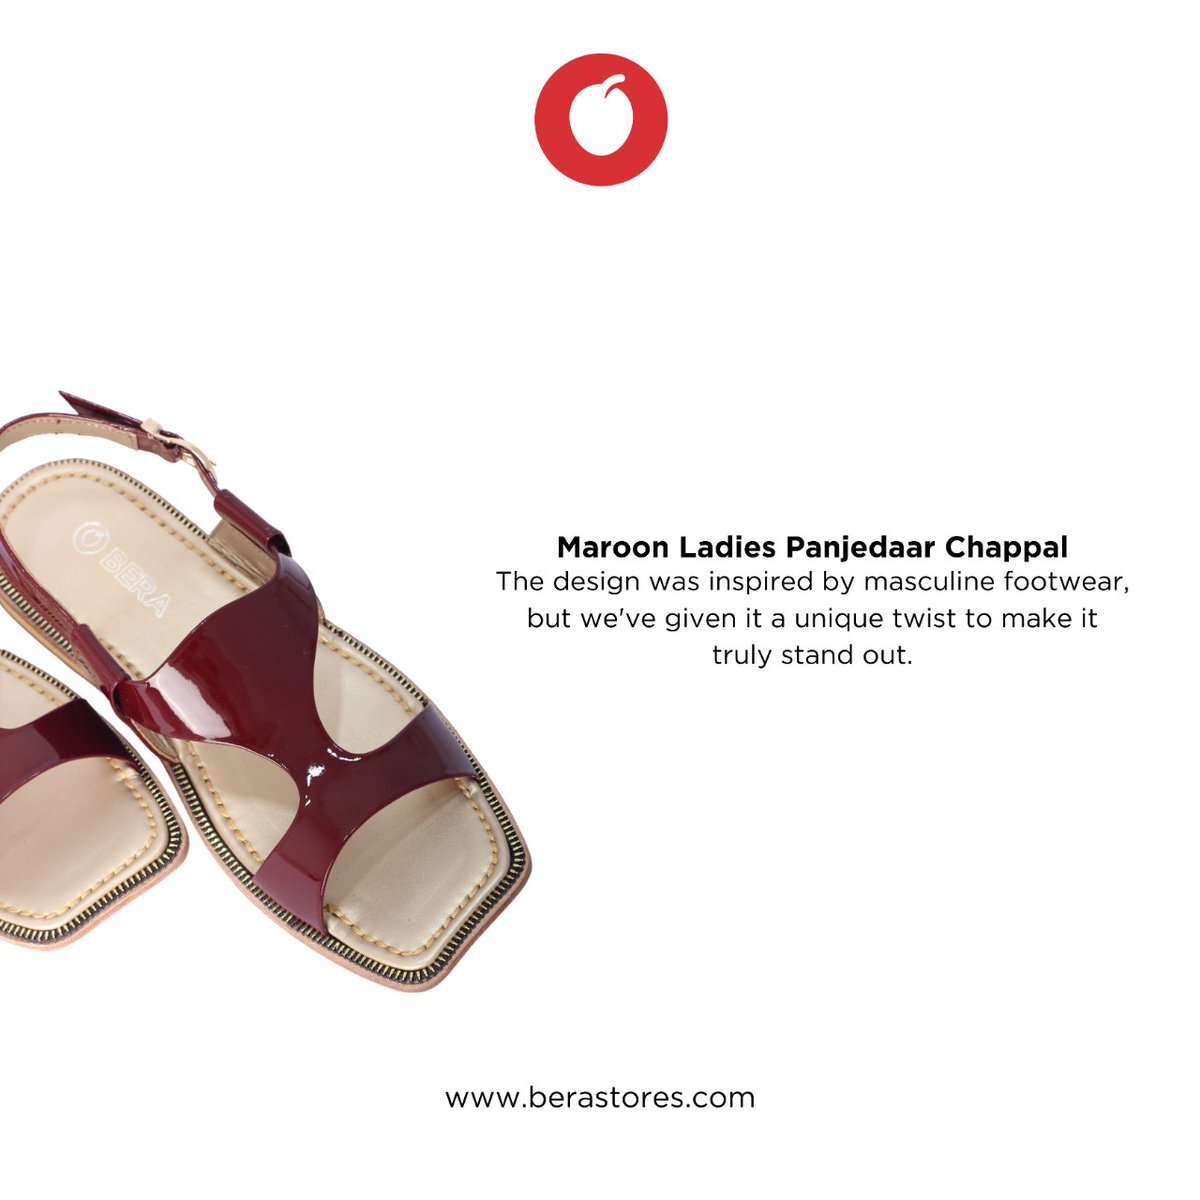 Maroon Ladies Panjedaar Chappal - The design was inspired by masculine footwear, but we've given it a unique twist to make it truly stand out.

Shop: berastores.com 
WhatsApp: 0311 1644085 

#berastores #ladieschappal #ladiespanjedar #chappal #ladies #footwear #women